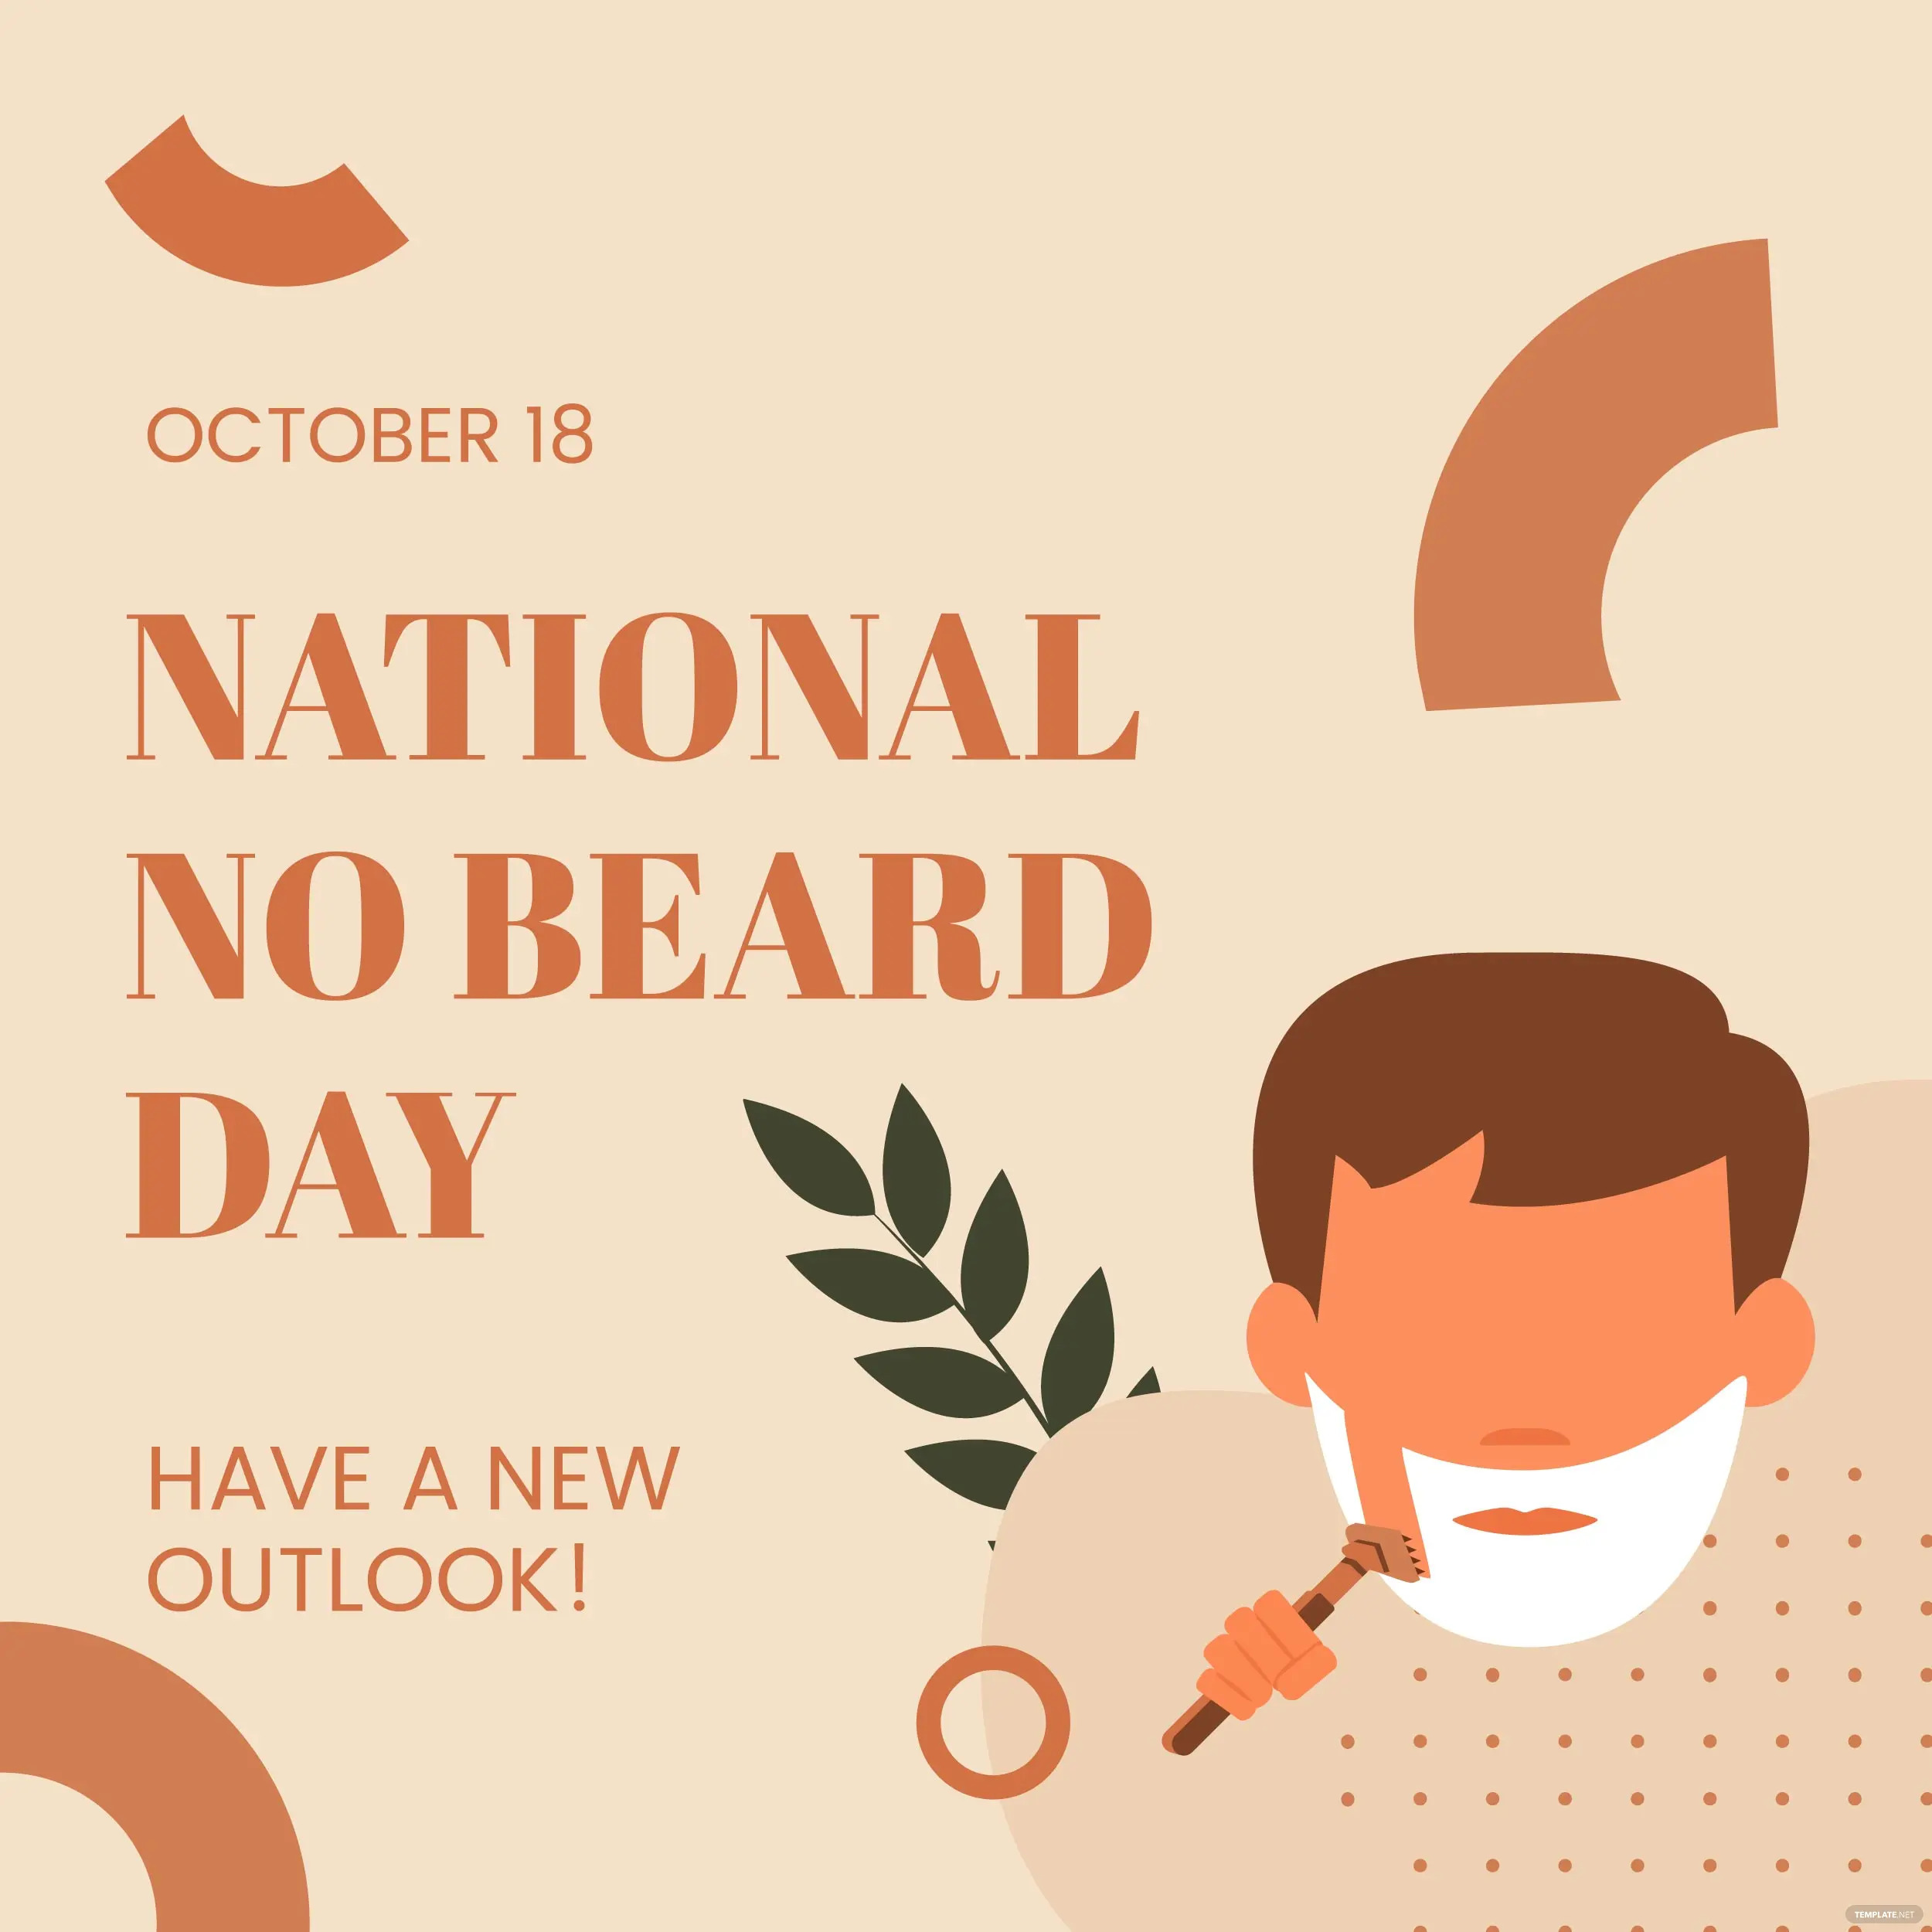 National No Beard Day When Is National No Beard Day? Meaning, Dates